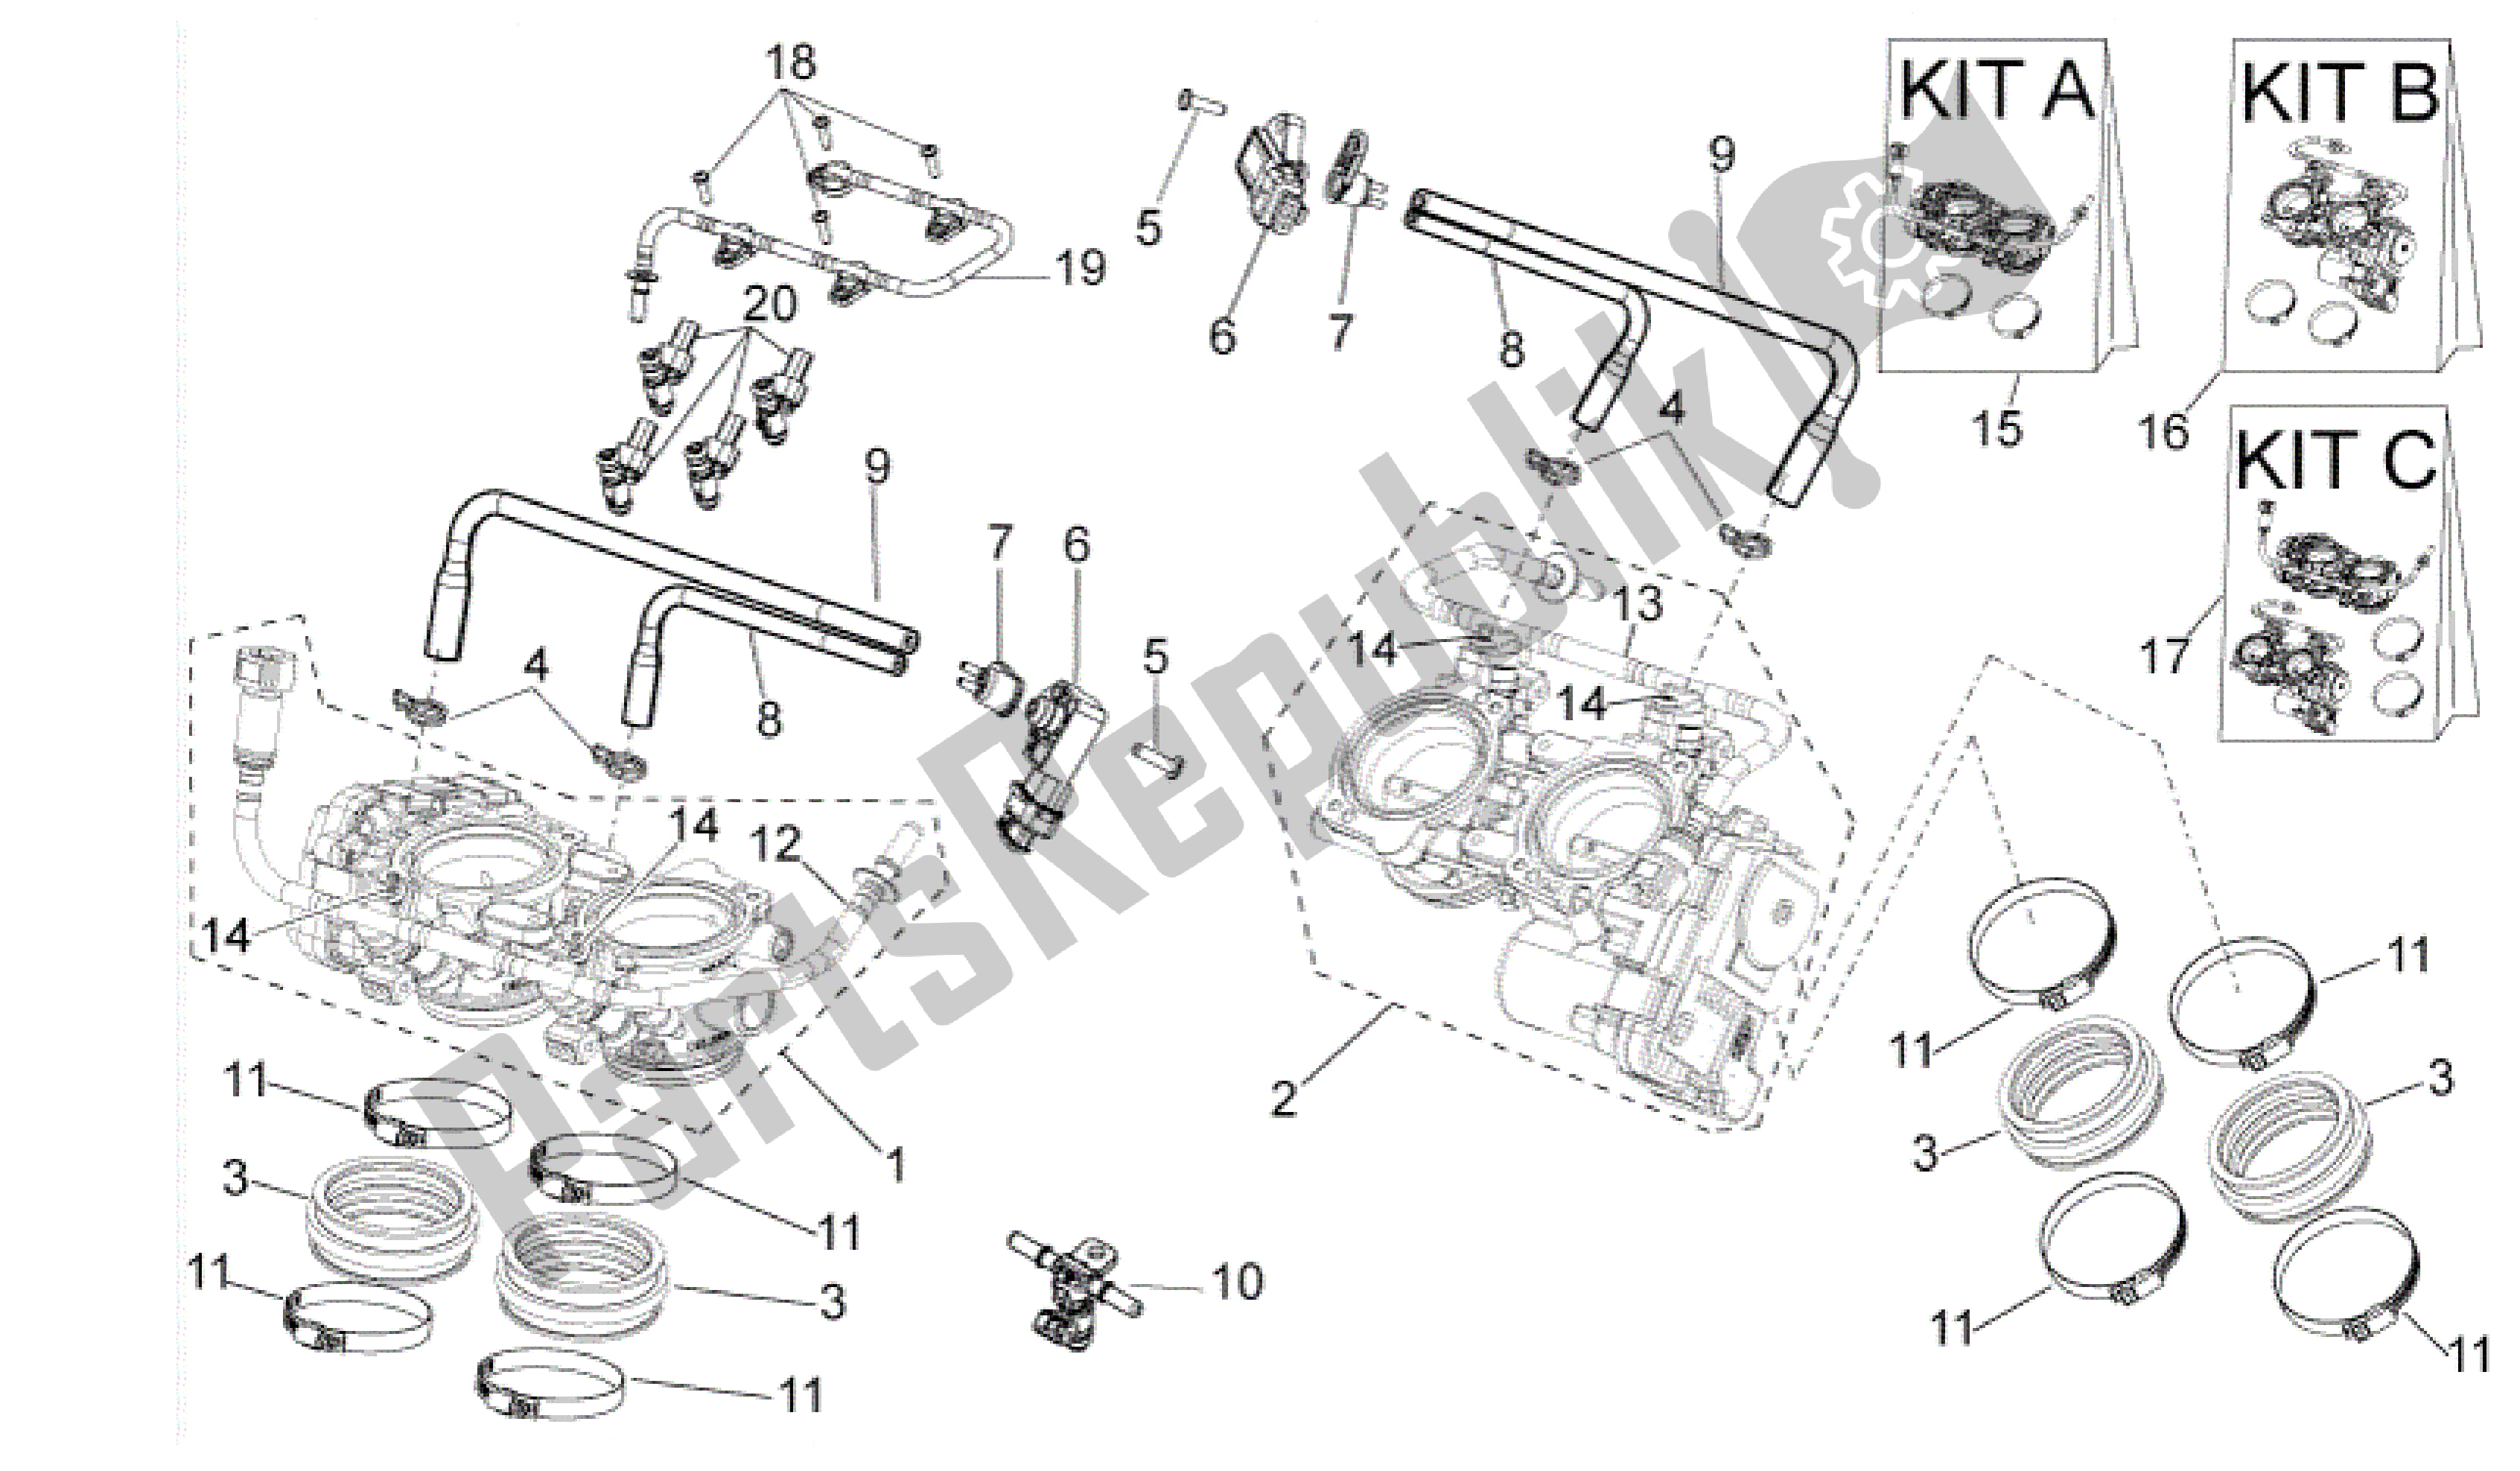 All parts for the Throttle Body of the Aprilia RSV4 Aprc R ABS 3984 1000 2013